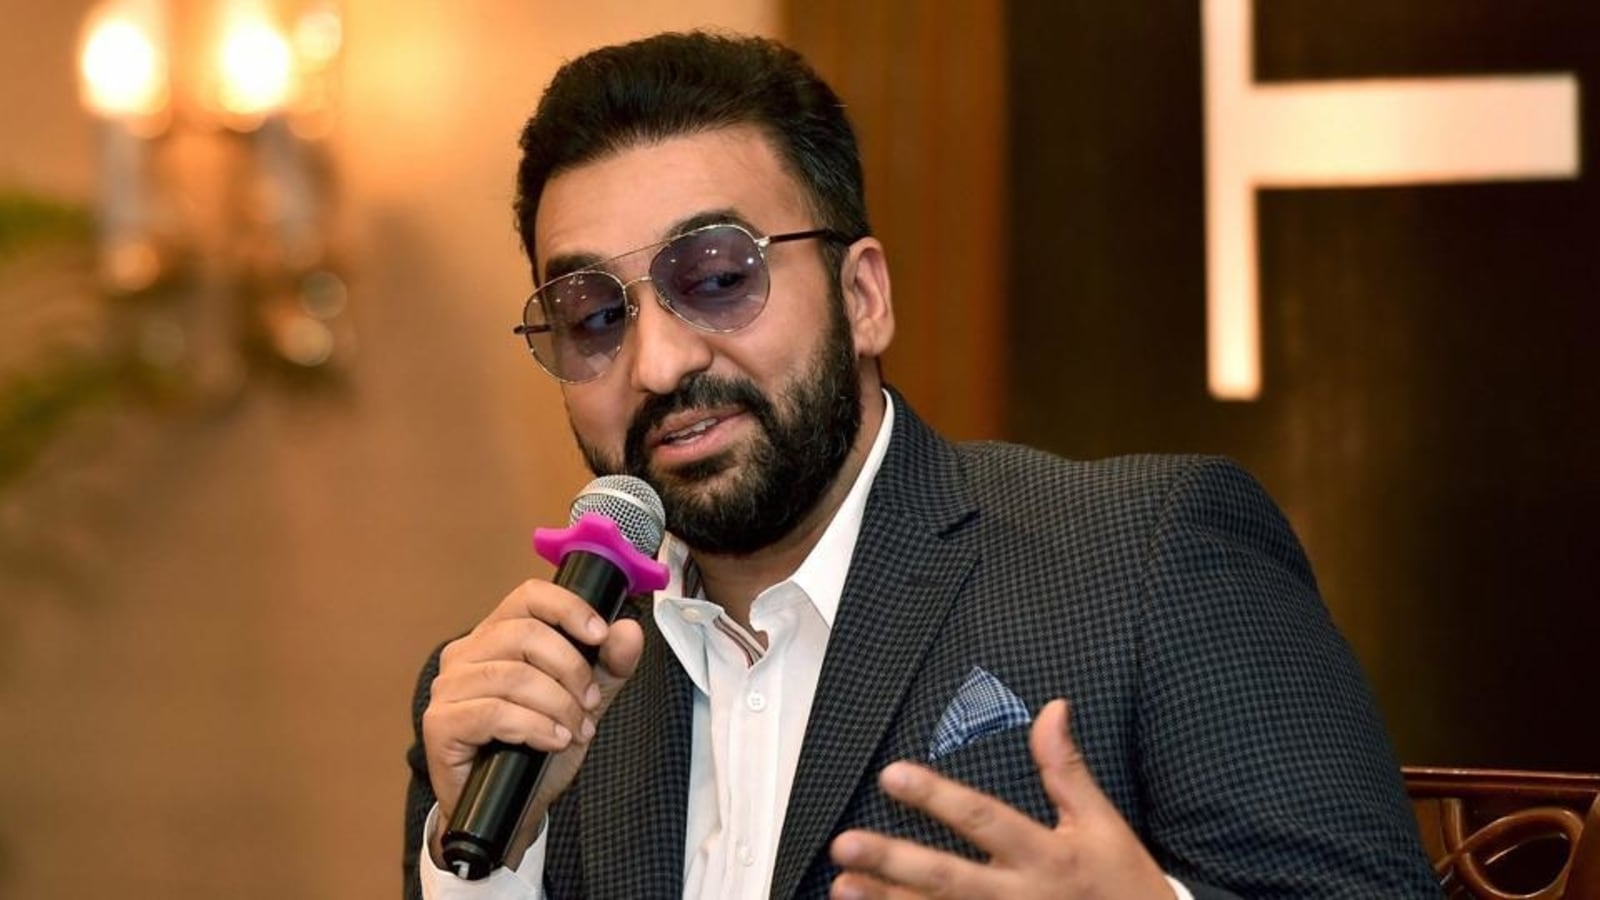 Shilpa X Video Sex - Politicians watching porn': Raj Kundra's old tweets go viral after his  arrest | Latest News India - Hindustan Times